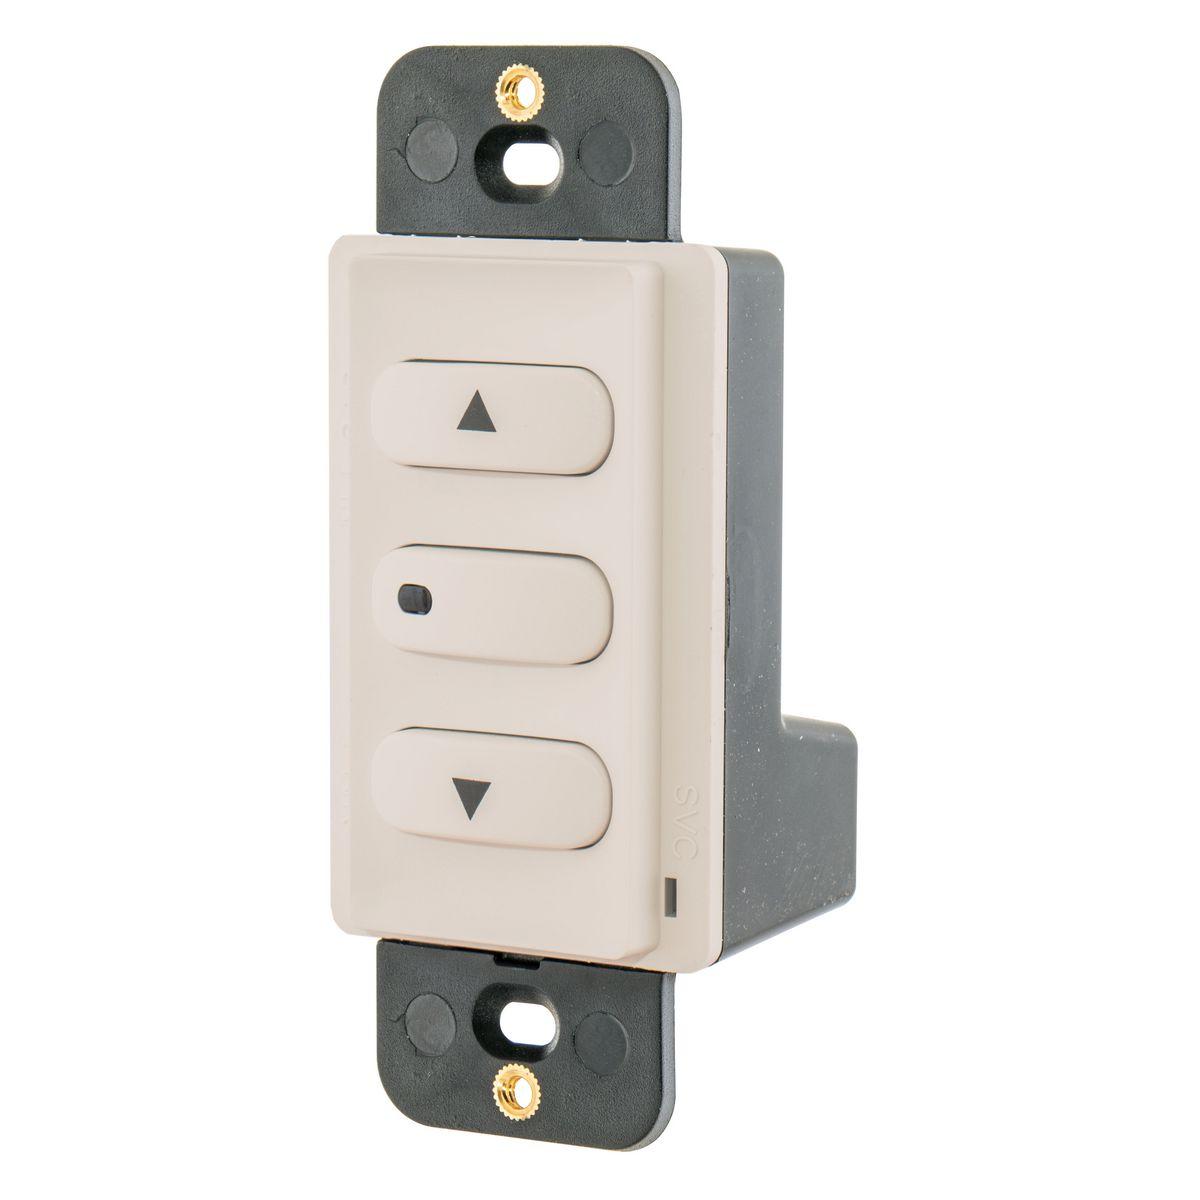 Hubbell DSL010LA Switches and Lighting Control, DimmingSwitch, Low Voltage, Latching, 0-10V DC, Light Almond 